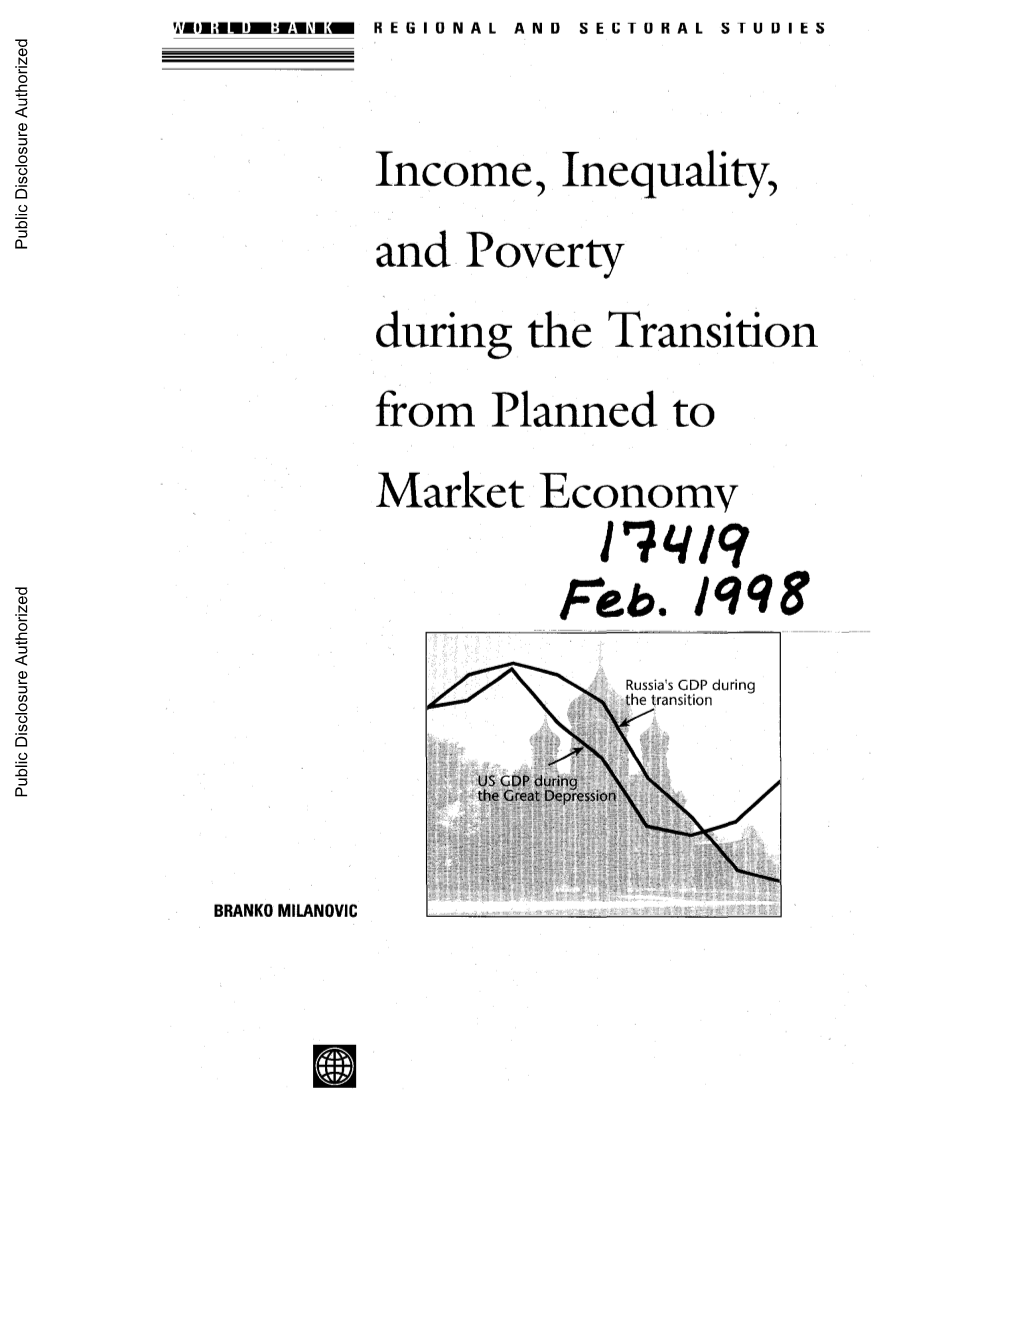 Income, Inequality, and Poverty During the Transition from Planned To